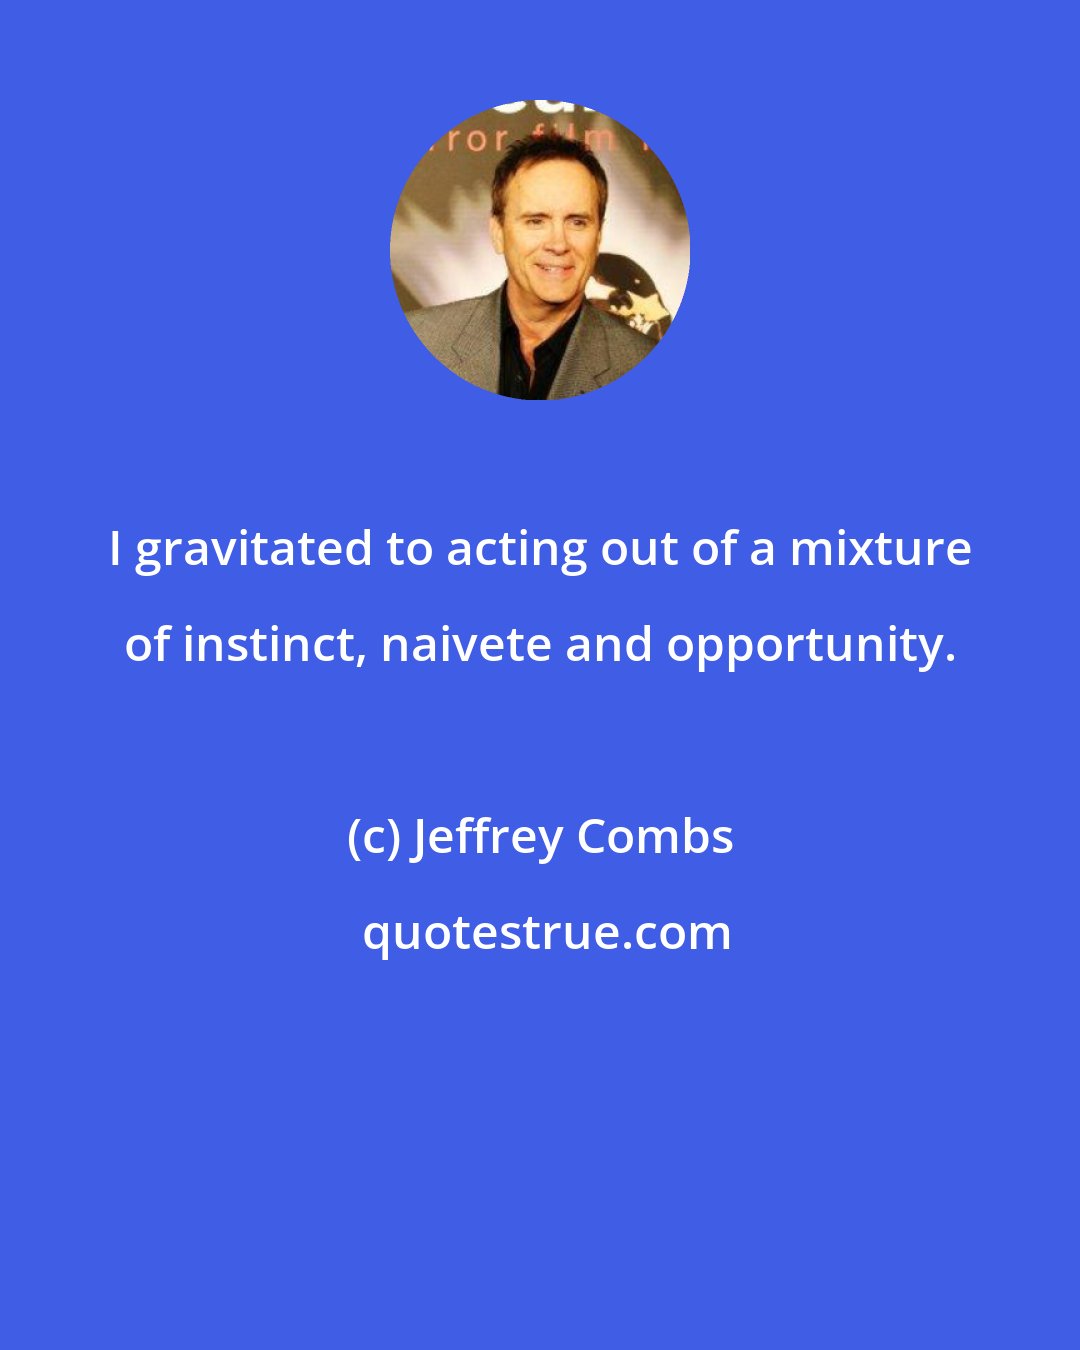 Jeffrey Combs: I gravitated to acting out of a mixture of instinct, naivete and opportunity.